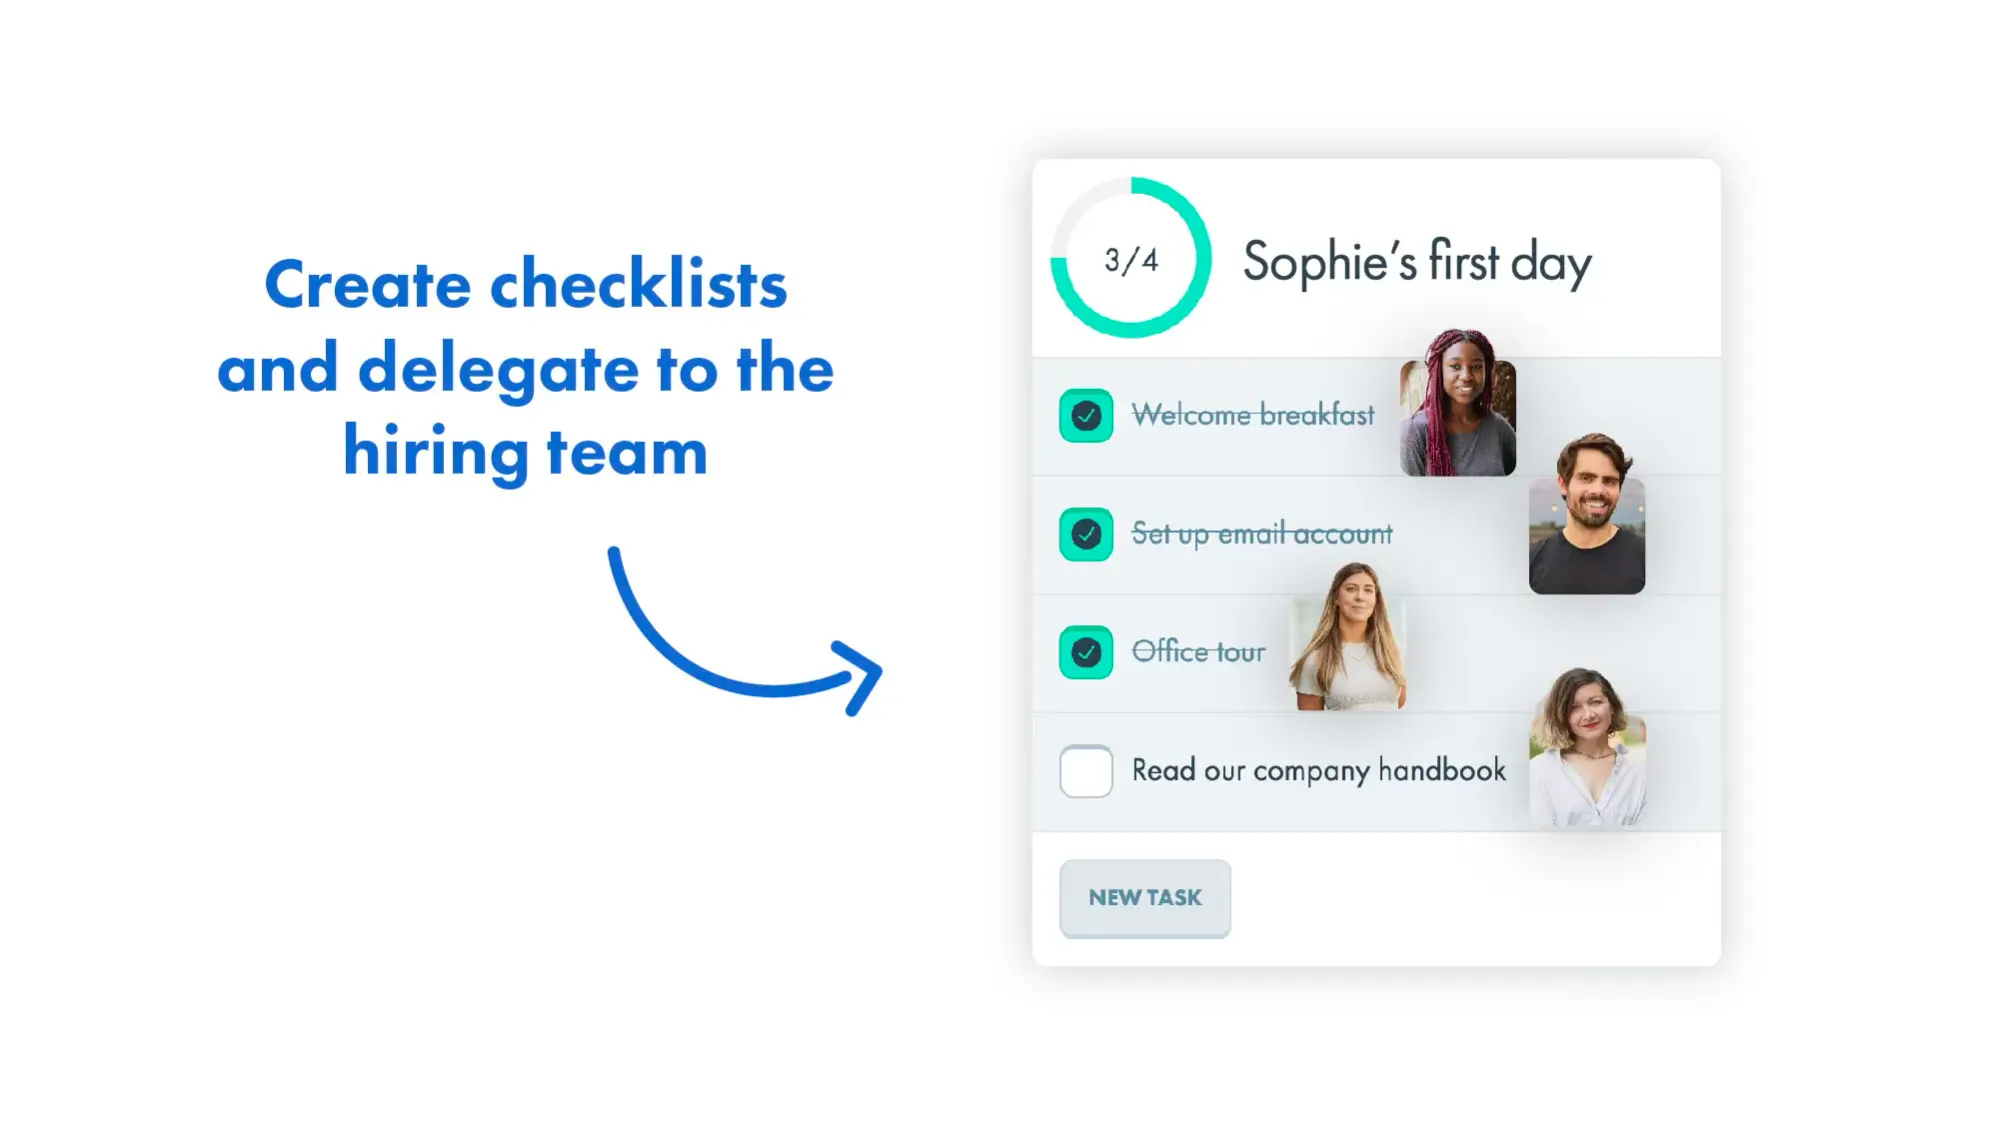 Create onboarding checklist to collect new starter details